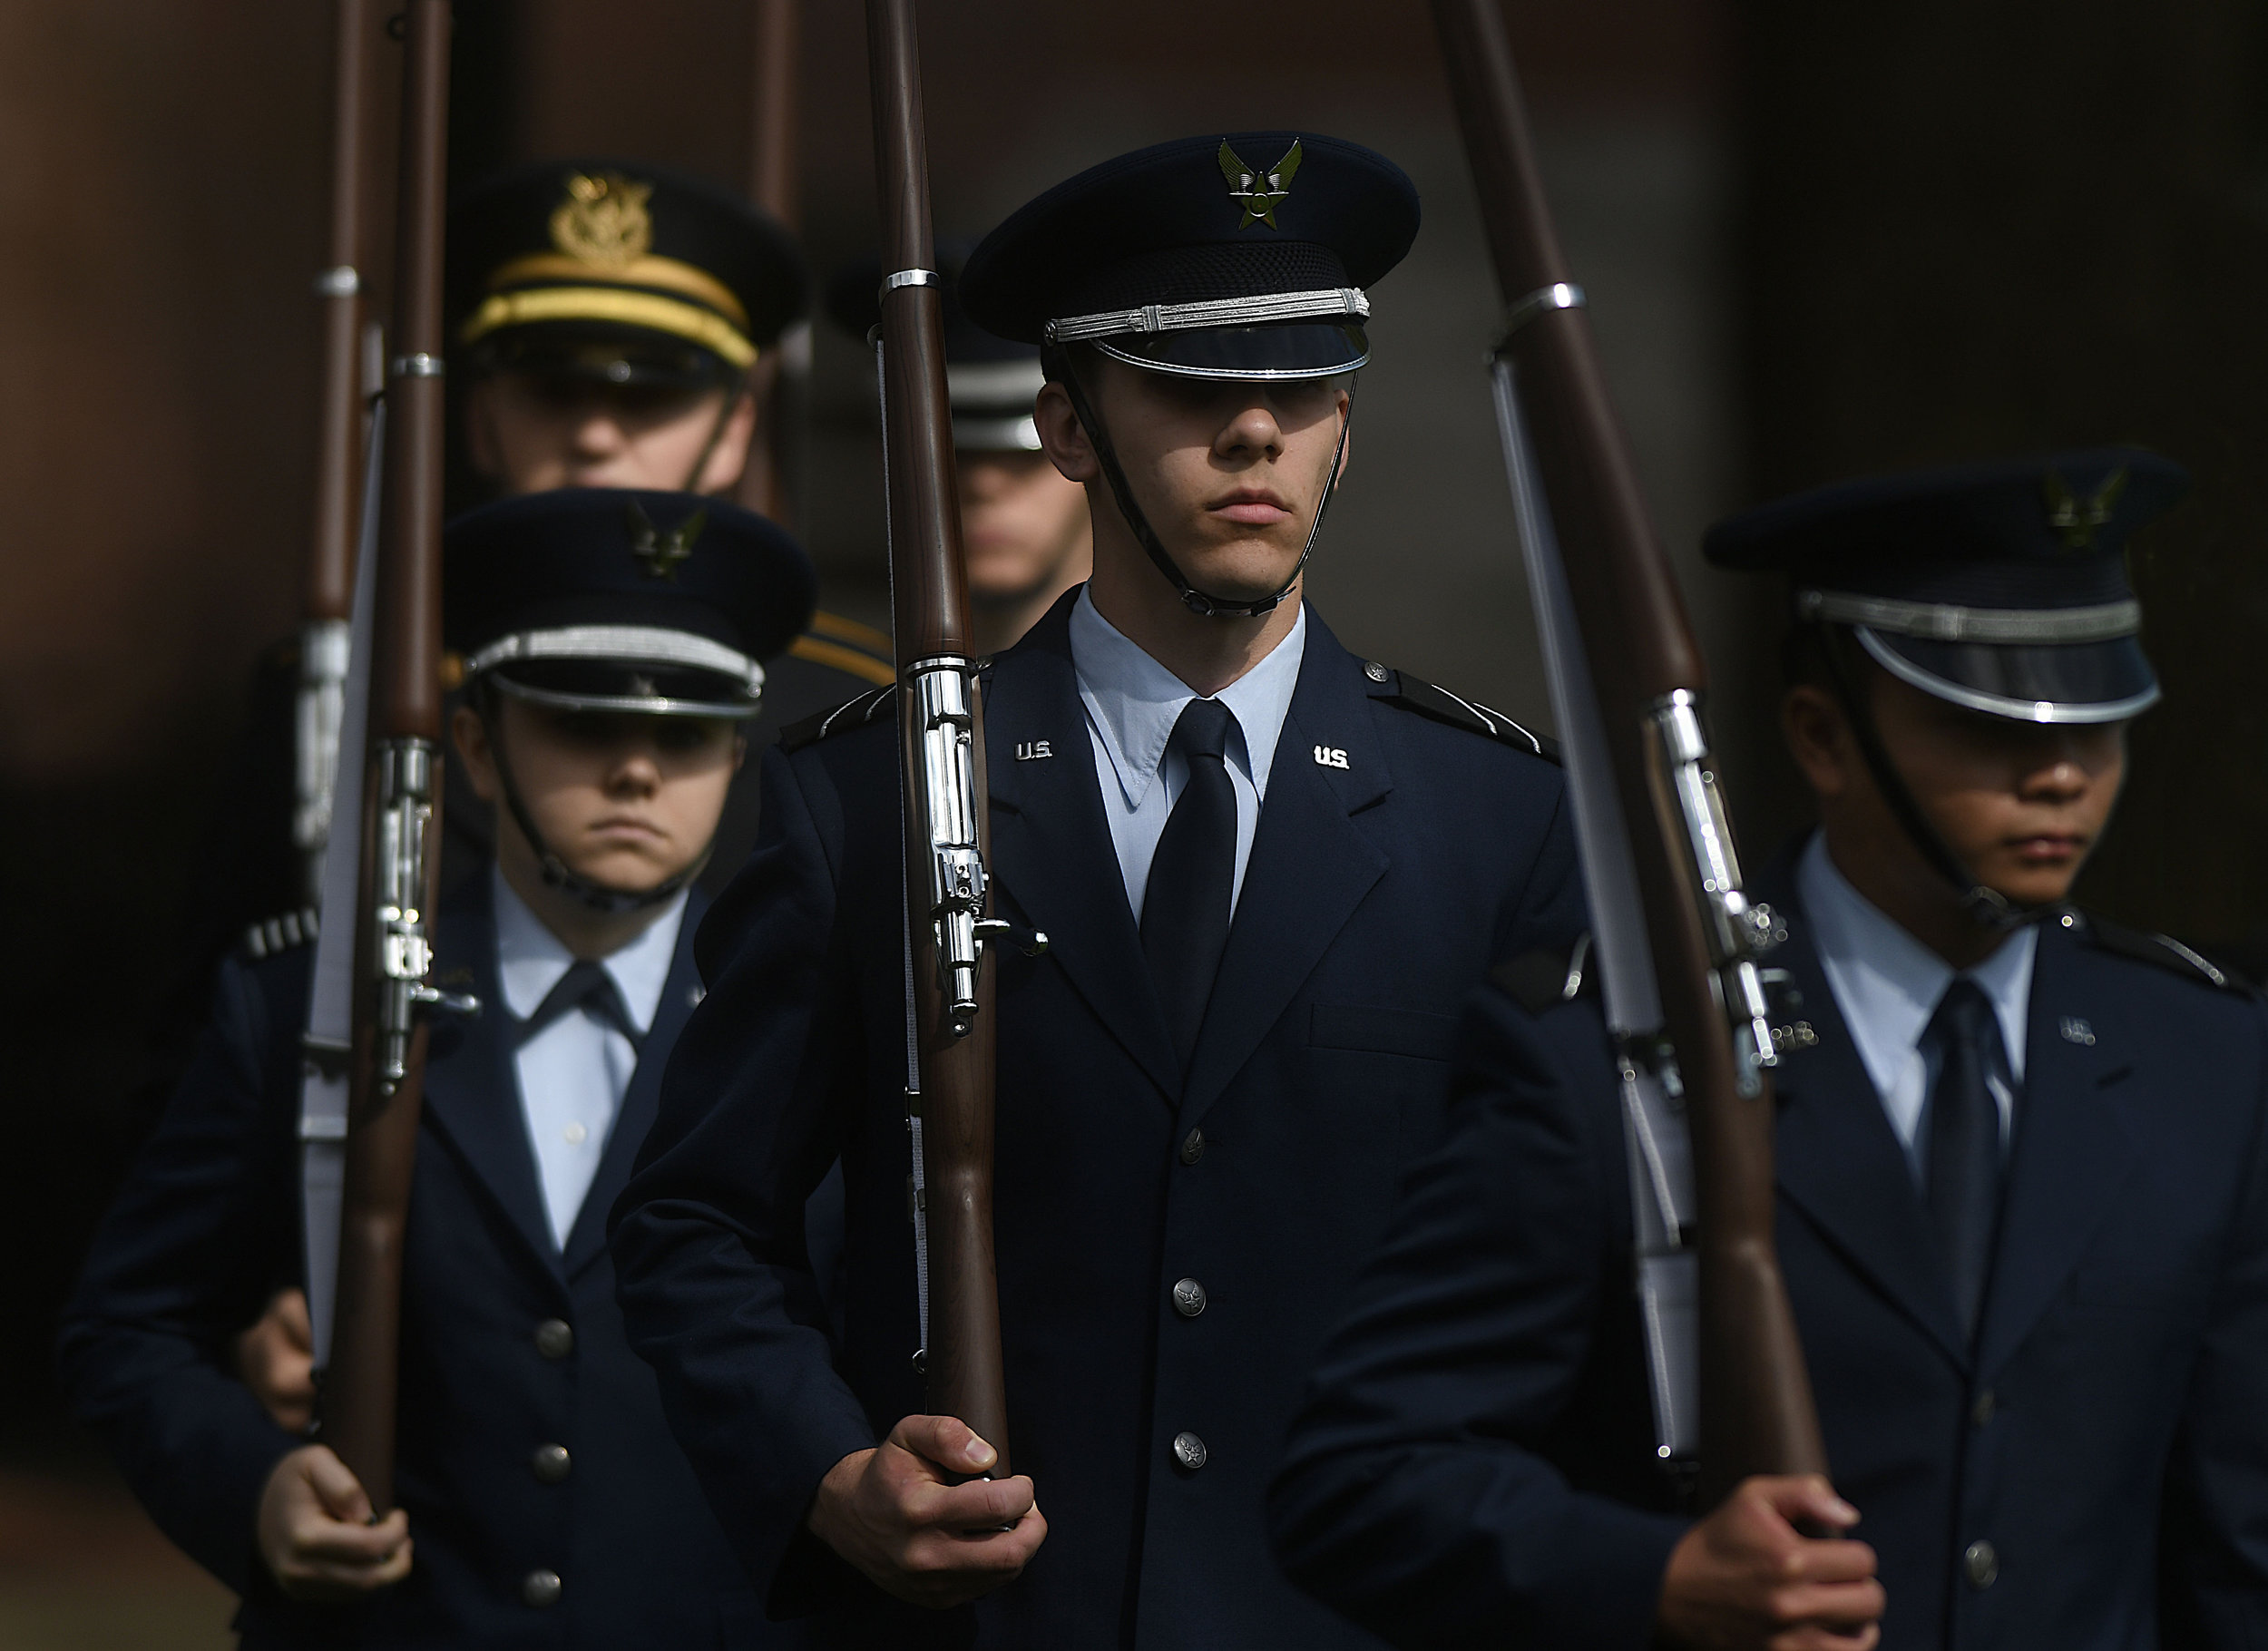  Members of various branches in Mizzou’s ROTC perform in joint ceremony in Columbia, Mo. on May 4, 2018.  